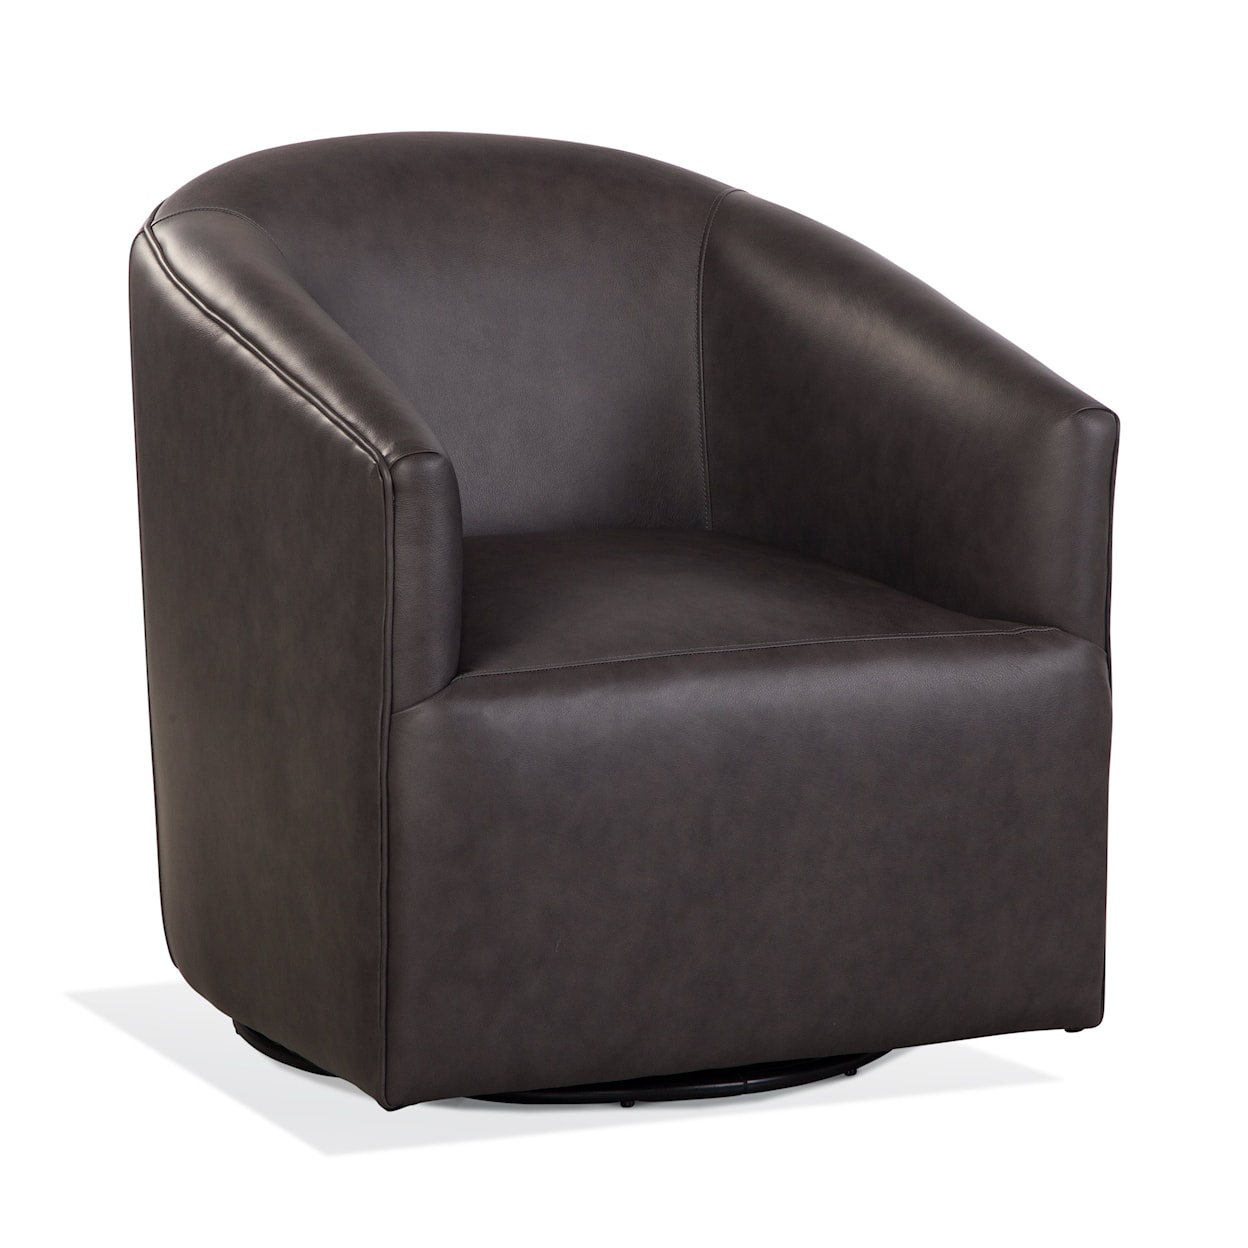 Braxton Culler Briles Briles Leather Memory Swivel Chair